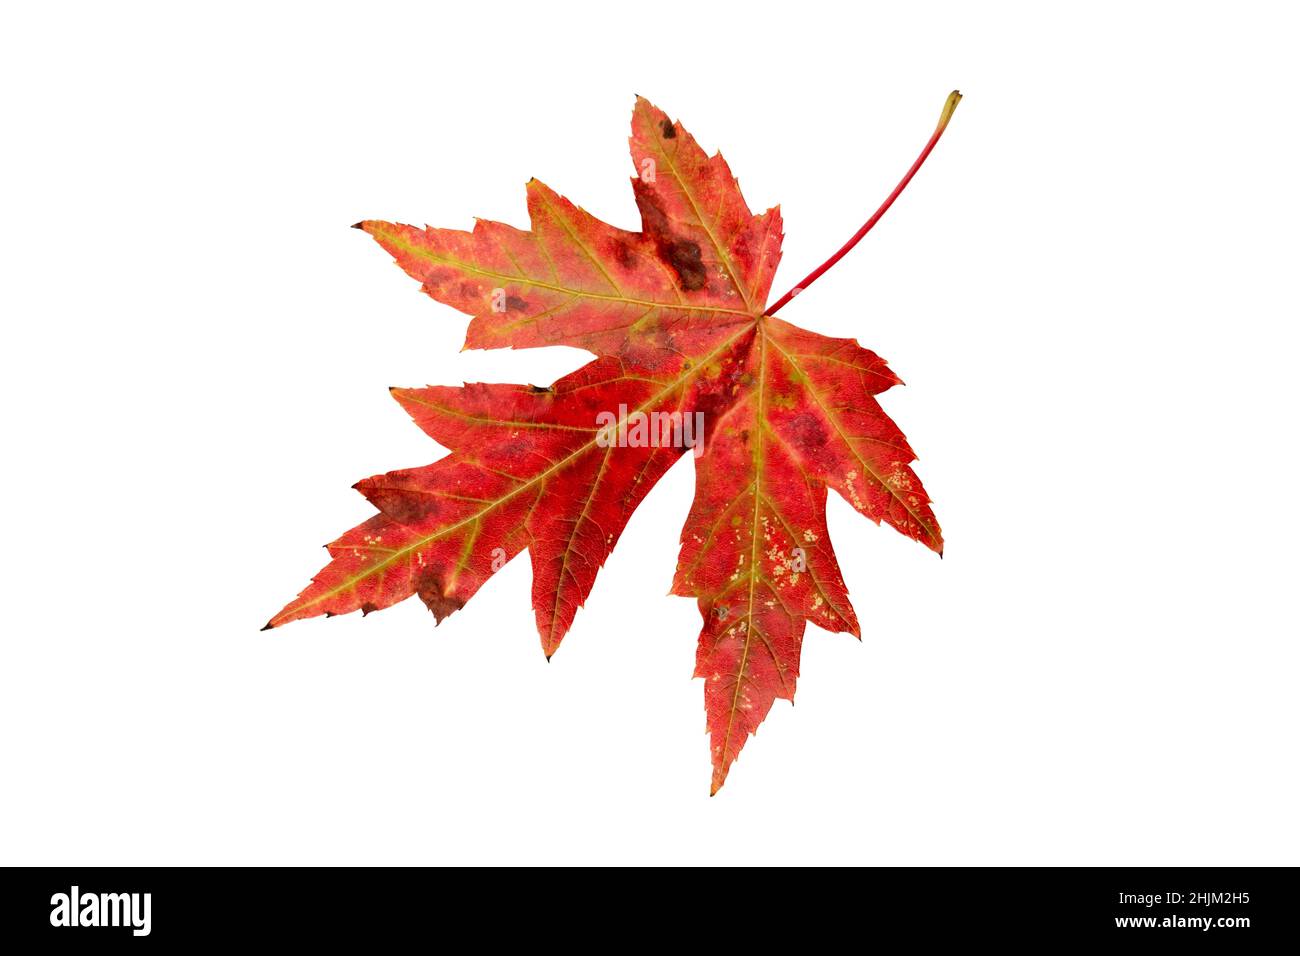 Silver maple or Acer saccharinum bright red autumn colored leaf isolated on white. Stock Photo